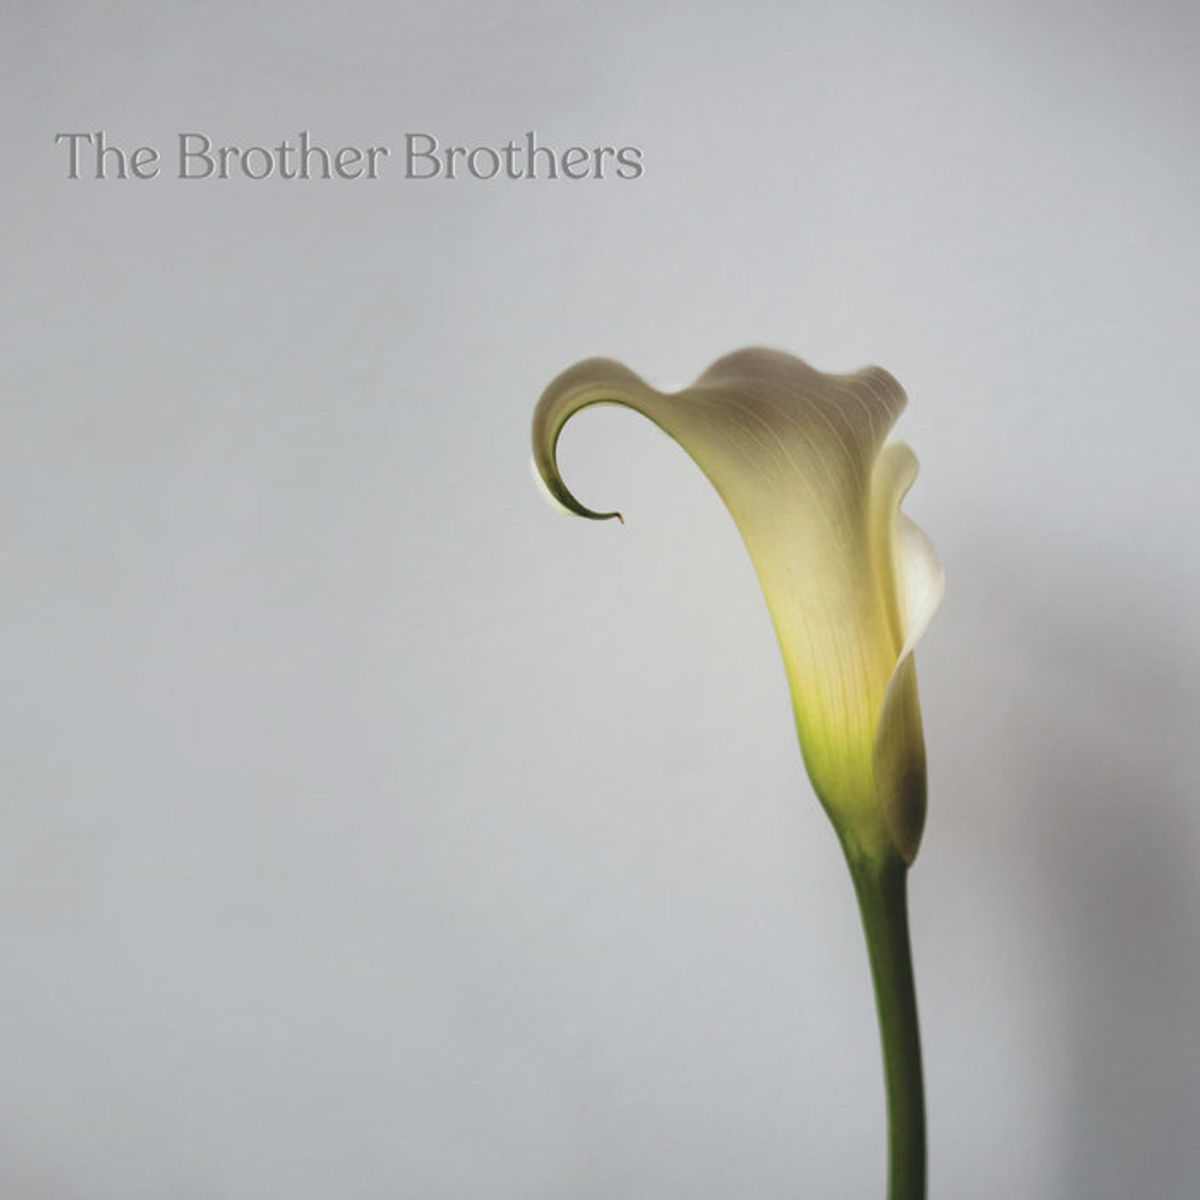 #DeSongsVan2021 - The Brother Brothers - The Calla Lilly Song (2021)